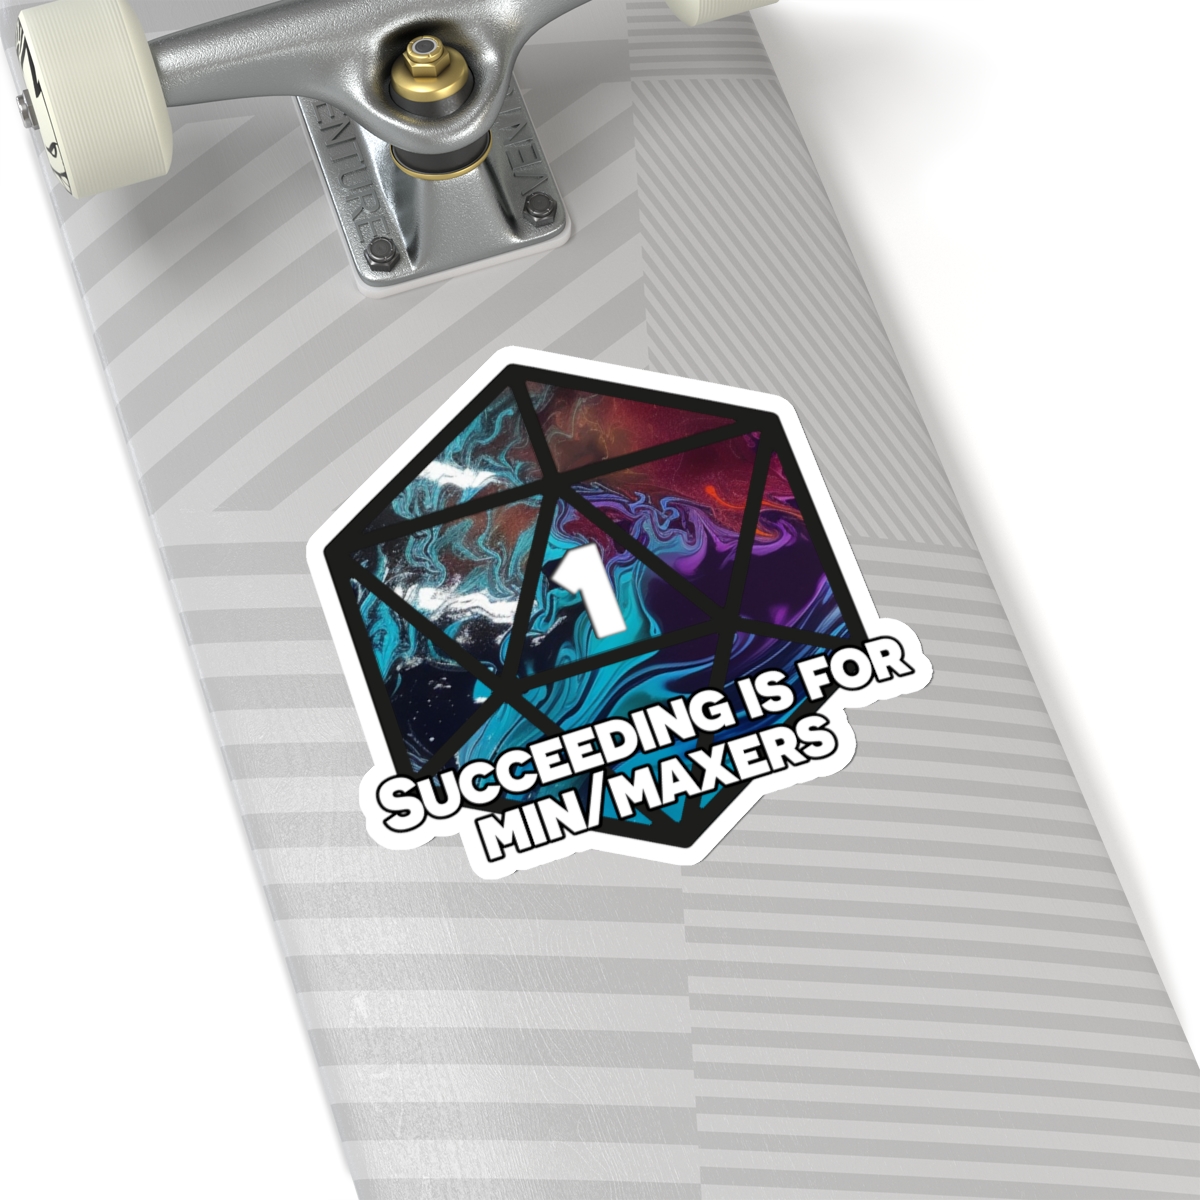 Succeeding is for Min/Maxers - Funny RPG Stickers - various sizes in transparent and white. product thumbnail image